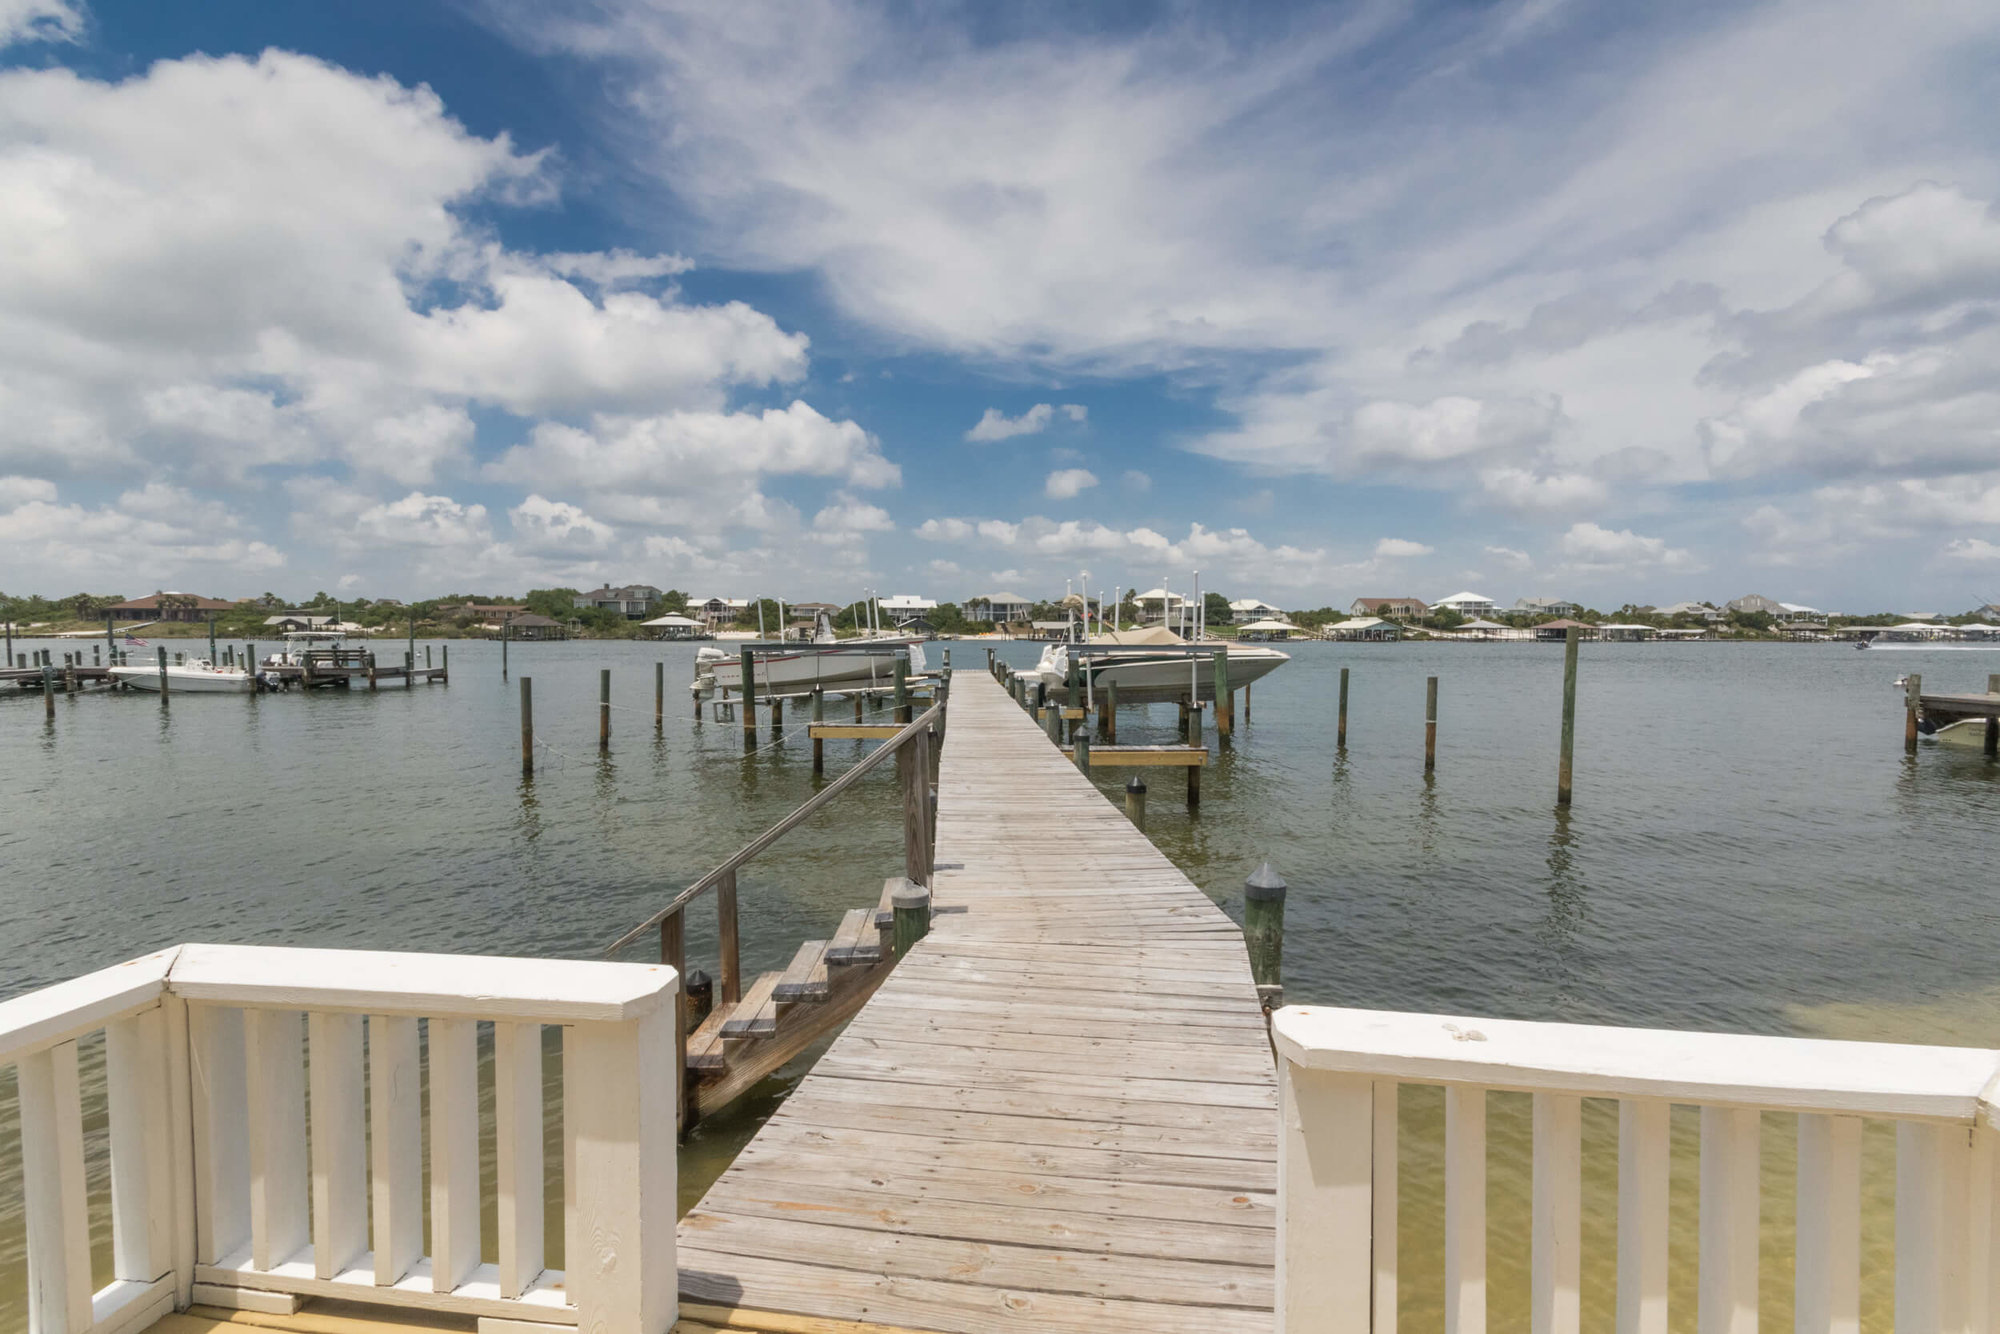 Fish of the pier to catch your own dinner at Pescador Landing in Perdido Key